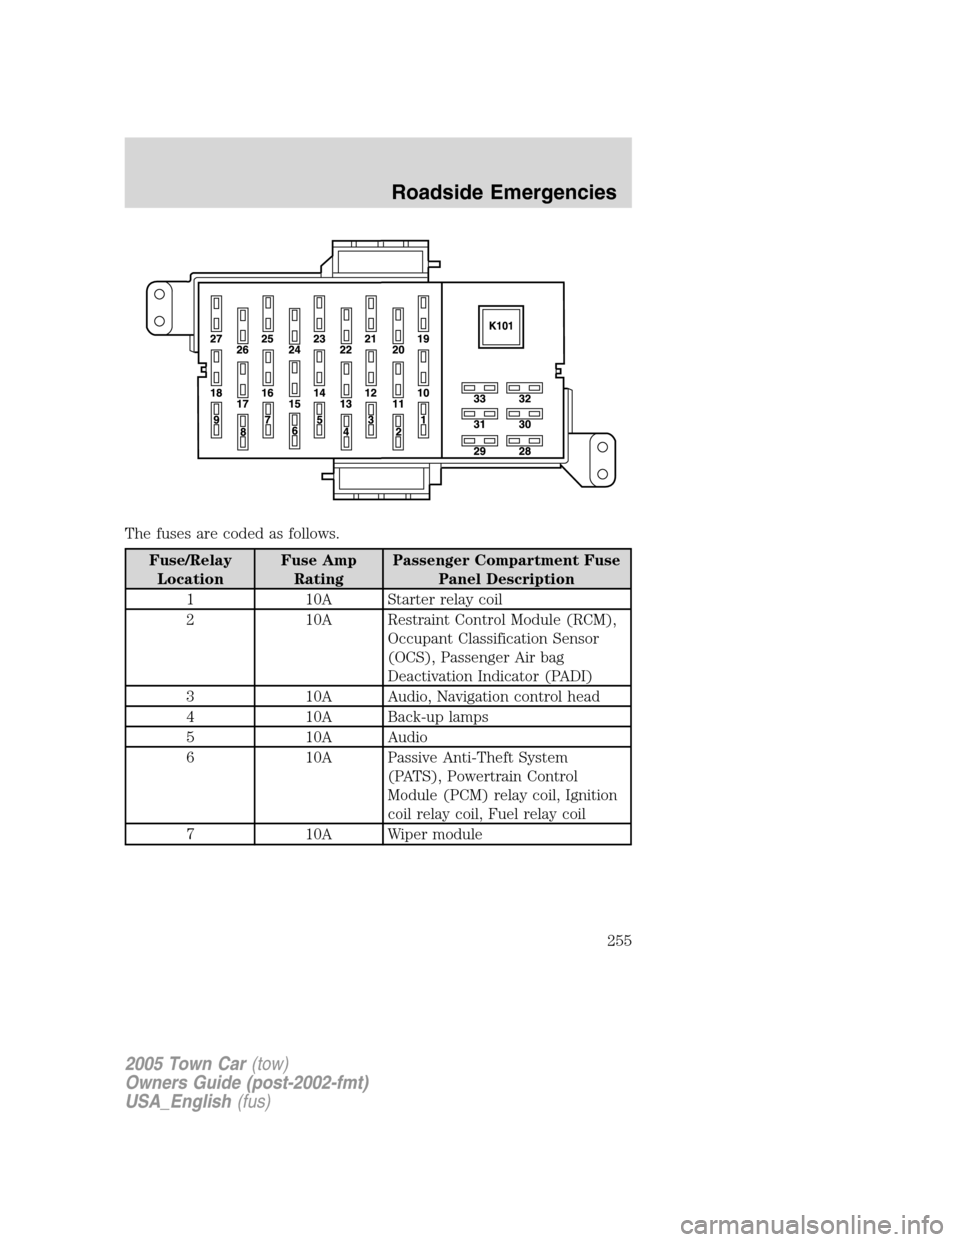 LINCOLN TOWN CAR 2005  Owners Manual The fuses are coded as follows.
Fuse/Relay
LocationFuse Amp
RatingPassenger Compartment Fuse
Panel Description
1 10A Starter relay coil
2 10A Restraint Control Module (RCM),
Occupant Classification Se